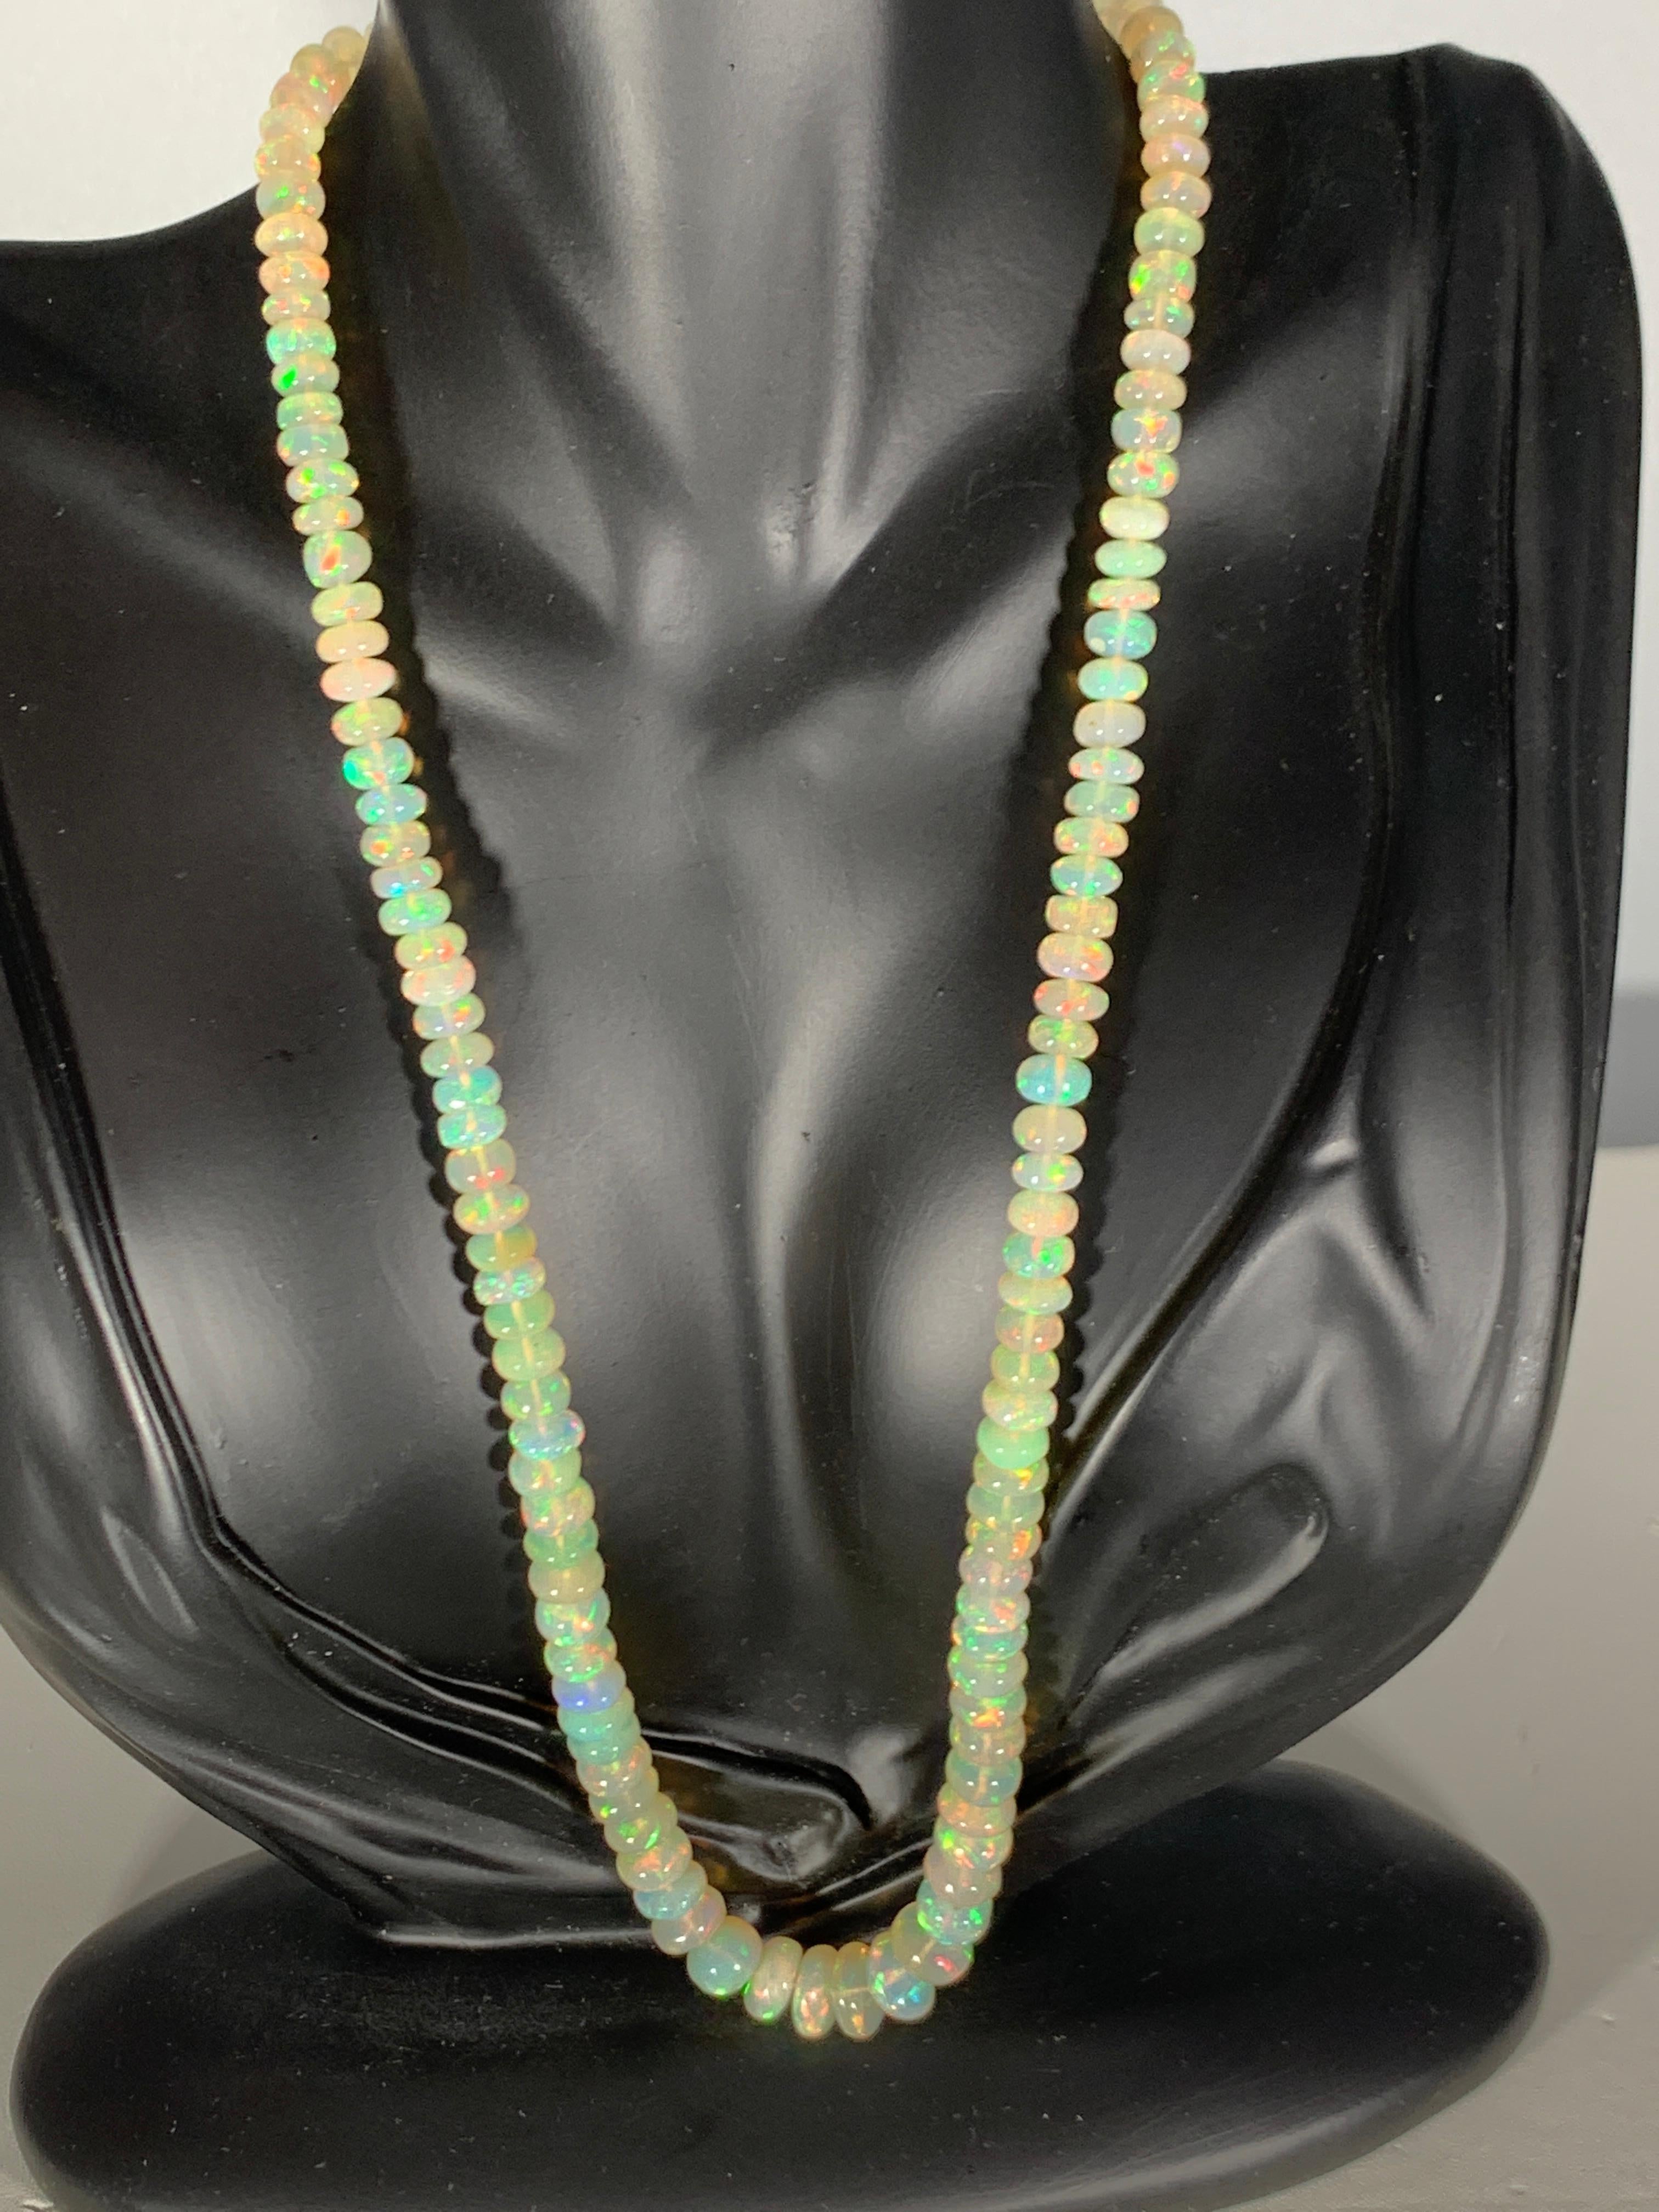  Natural Opal single strand Bead Necklace with 14 Karat gold Clasp. These are Ethiopian Beads
18.5